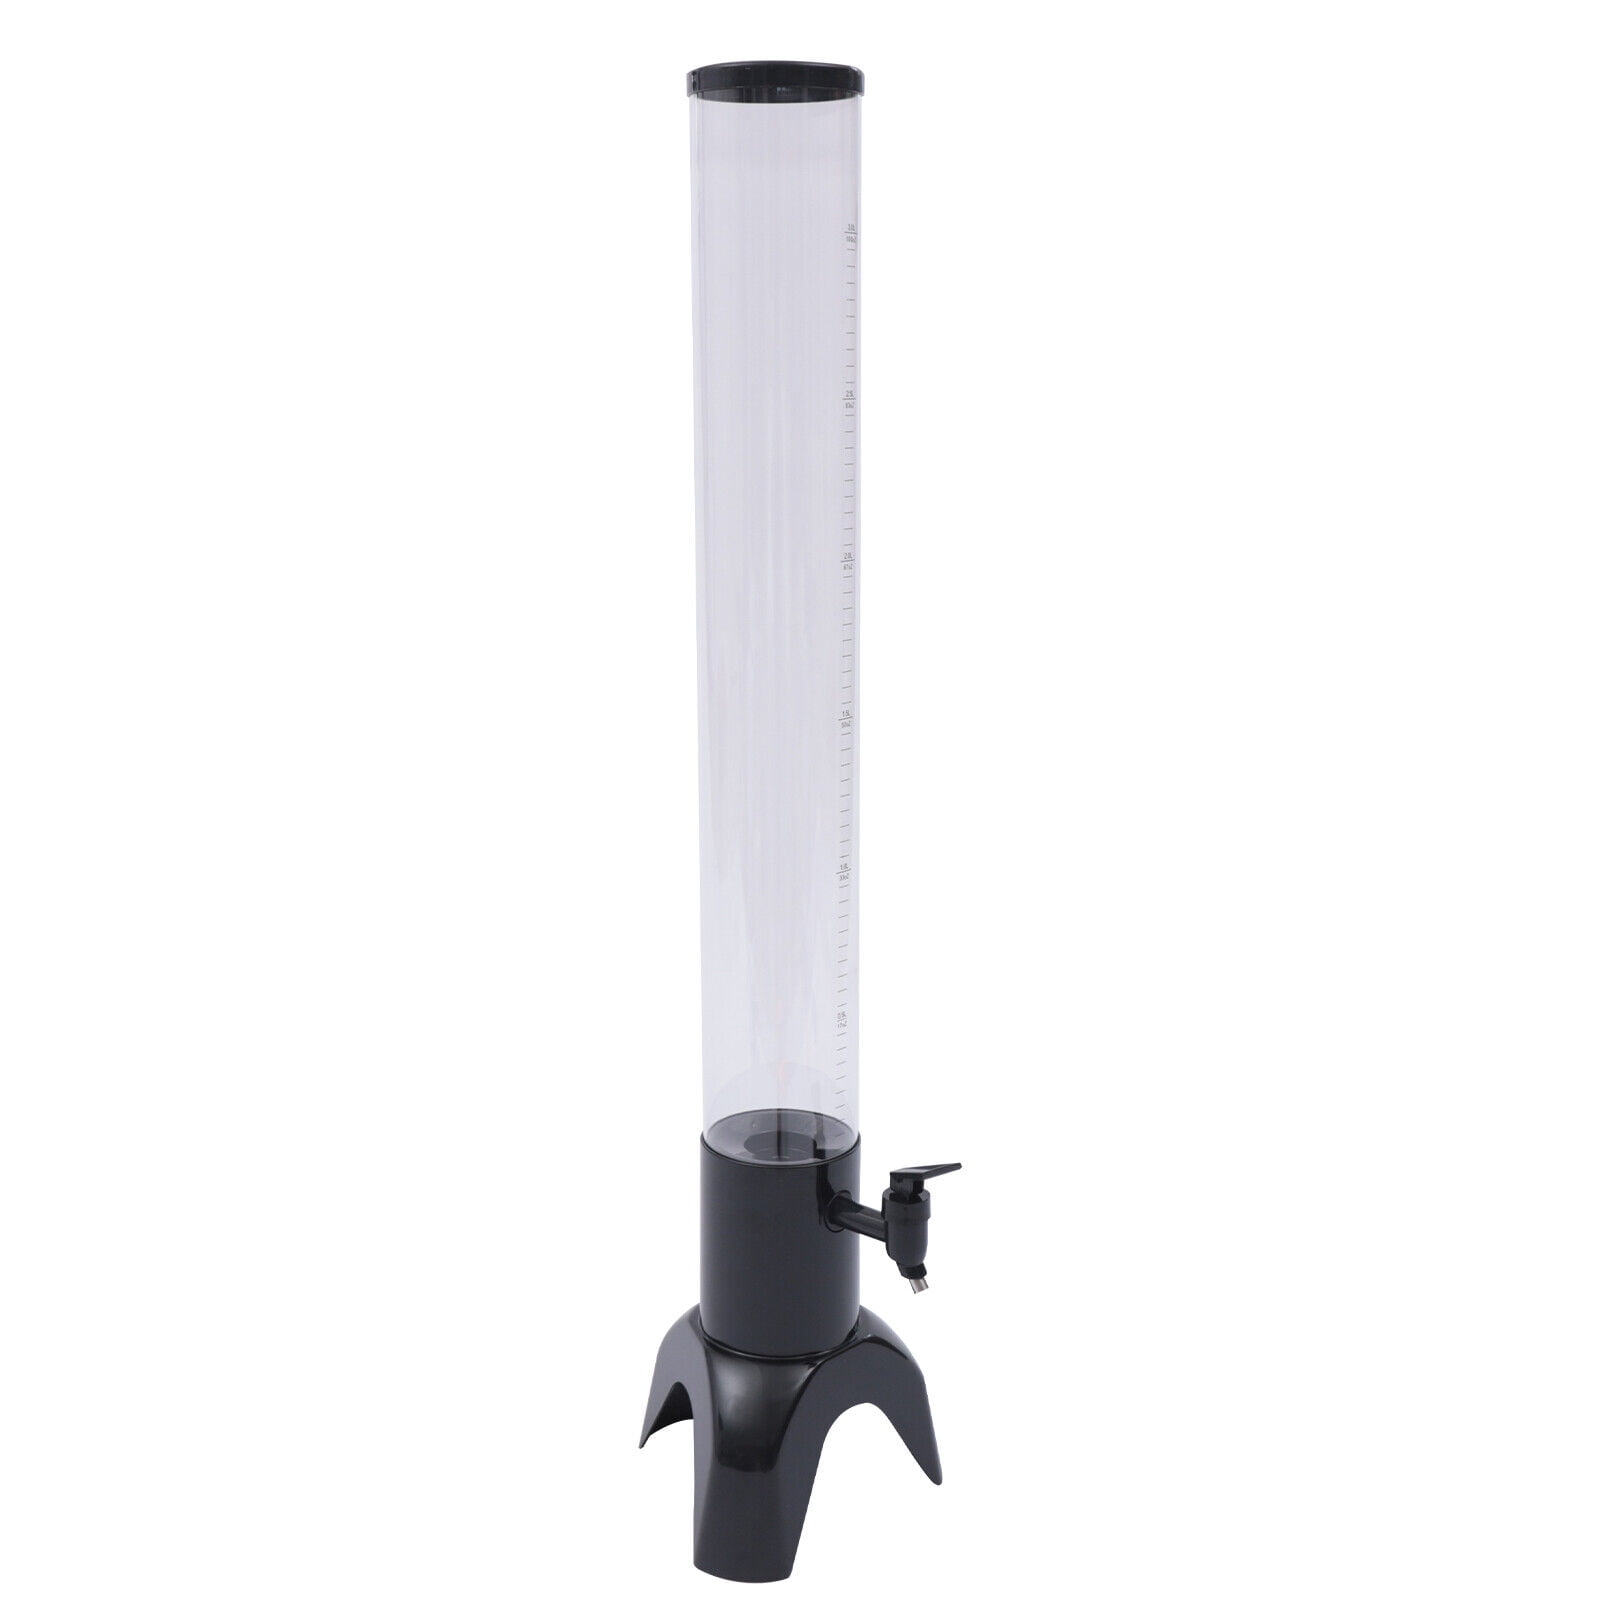 Beer Tower Dispenser 3L/100oz, Clear Liquor Drink Tower Dispenser with  Removable Ice Tube,Margarita Juice Beer Tower Drink Dispenser,Perfect for  Party